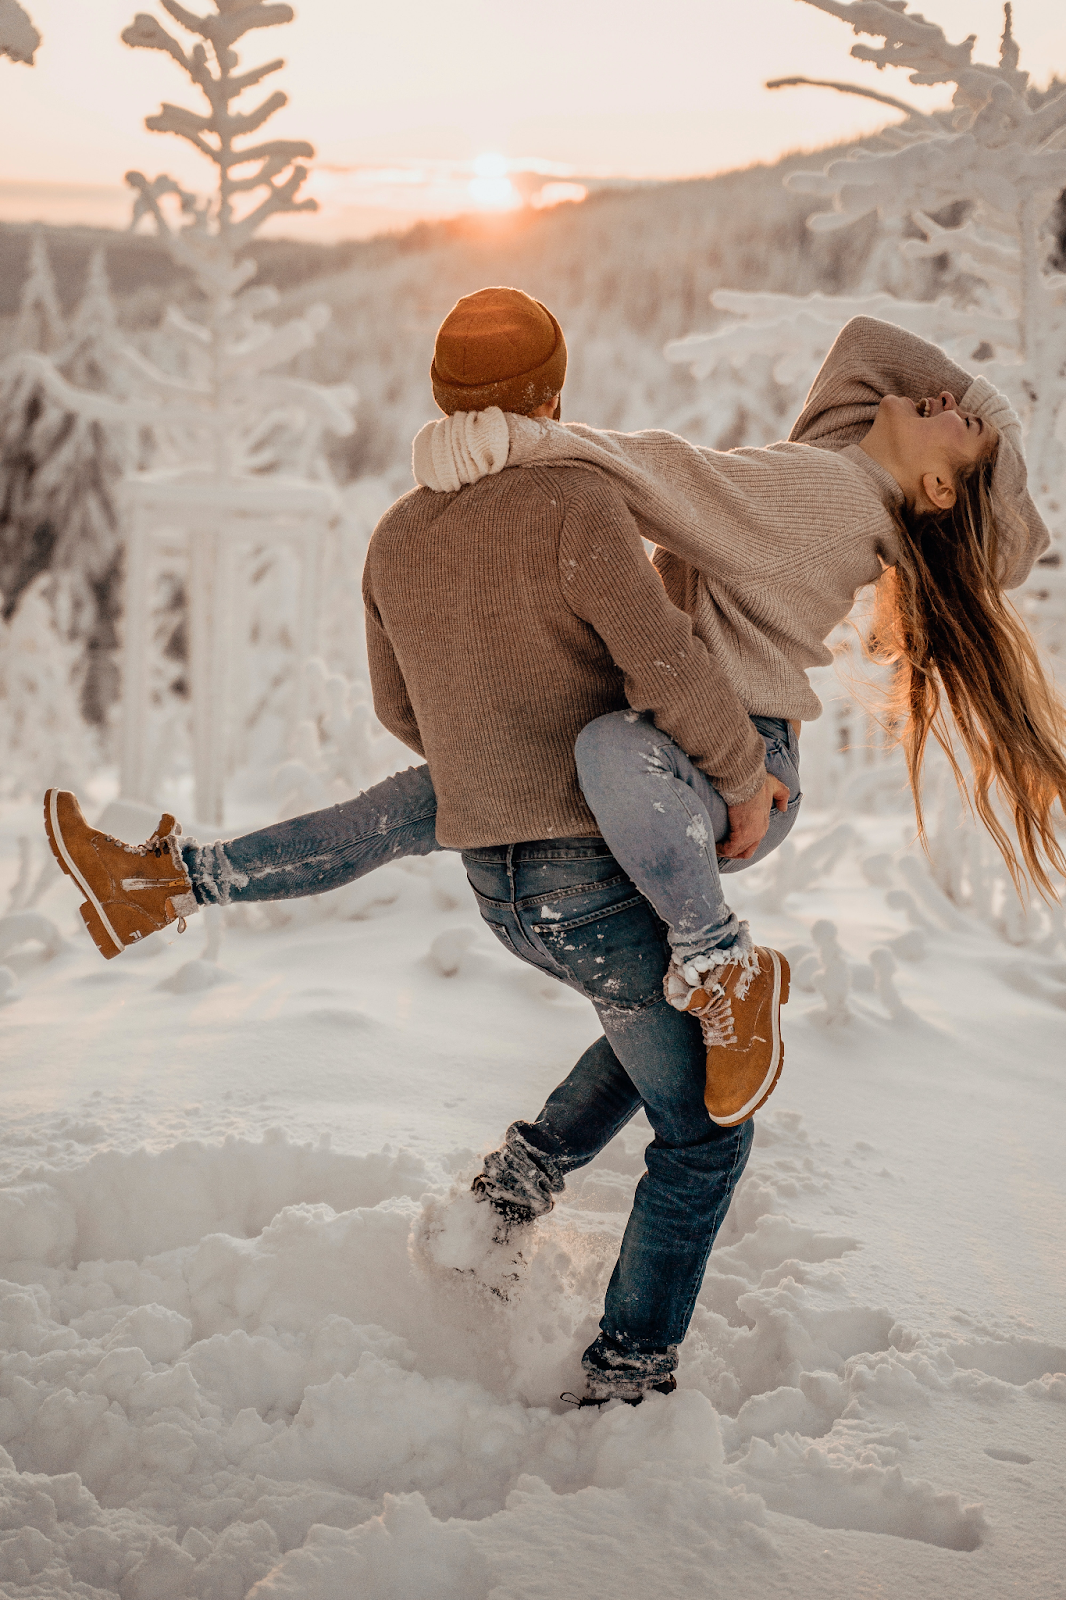 Cute Winter Pics Captions for Couples